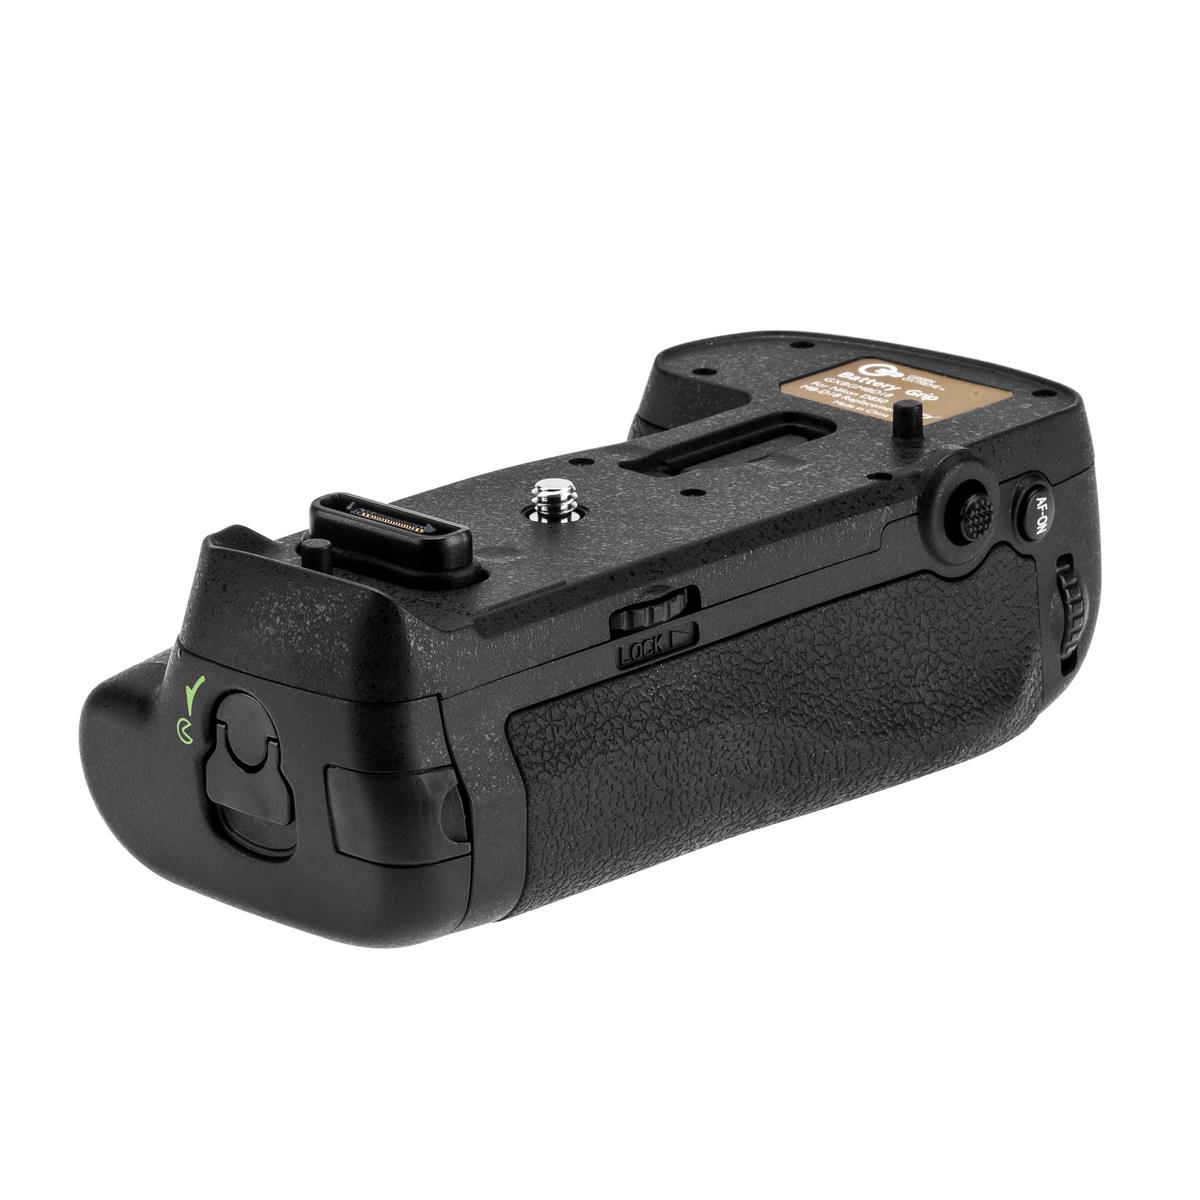 Image of Green Extreme MB-D18 Replacement Battery Grip for Nikon D850